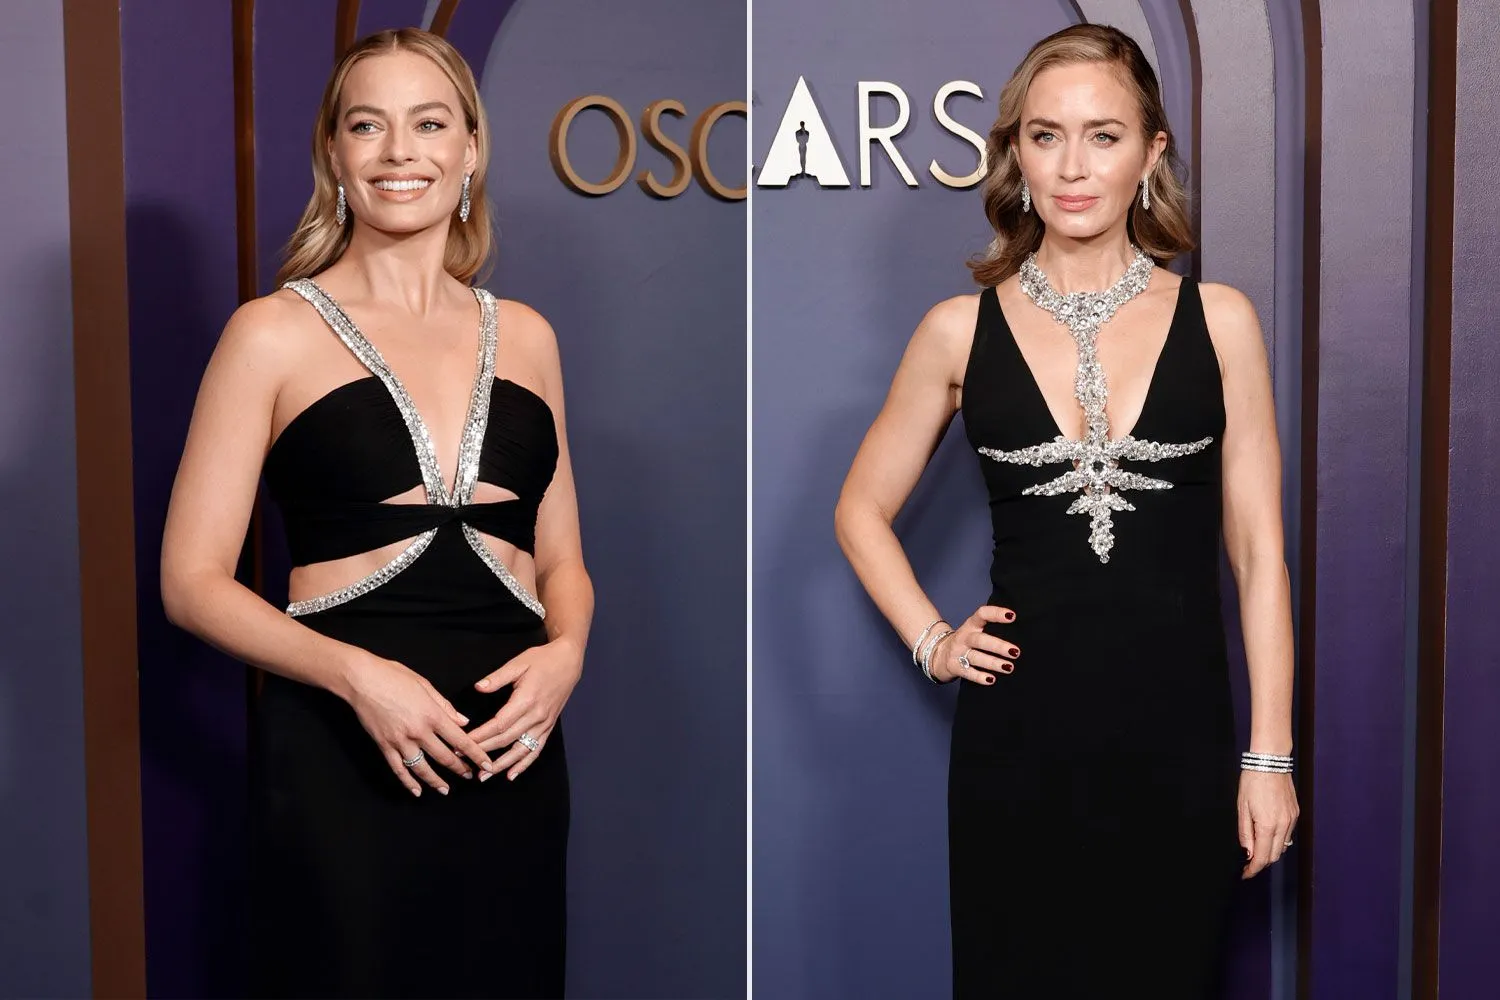 margot-robbie-and-emily-blunt-managed-to-steal-the-spotlight-at-the-governors-awards-red-carpet